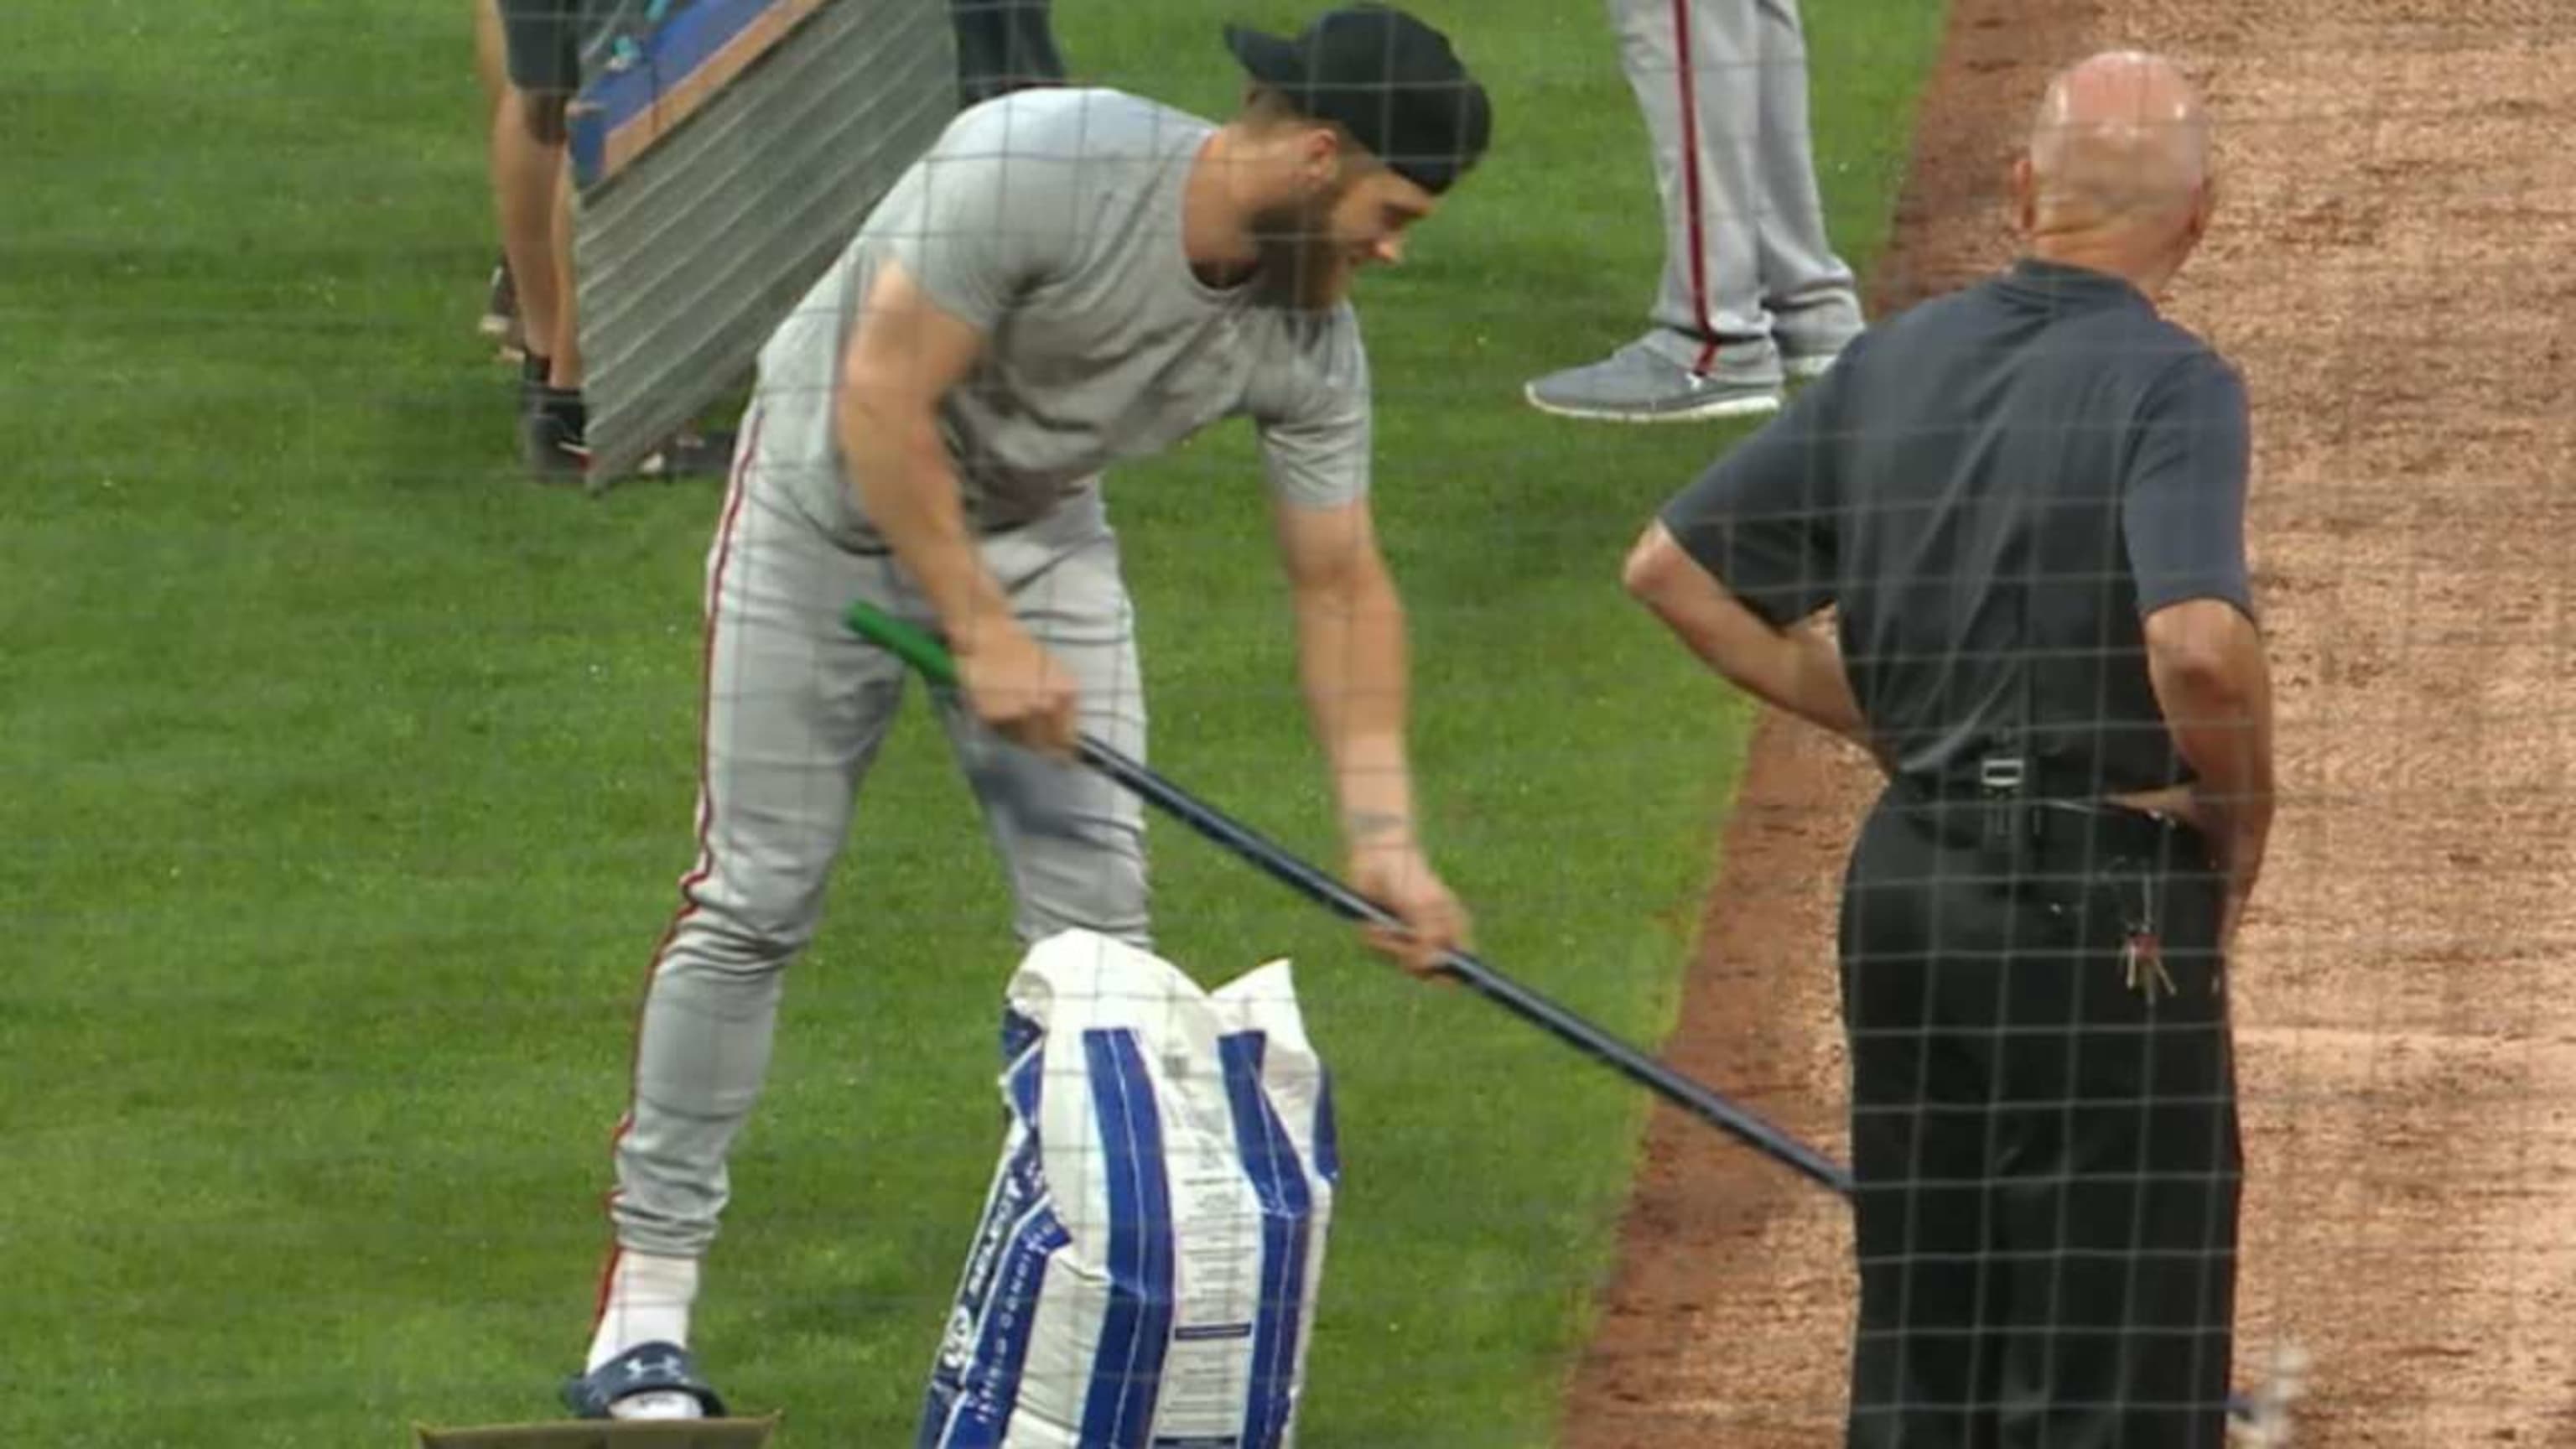 Phillies grounds crew uses blowtorch on field